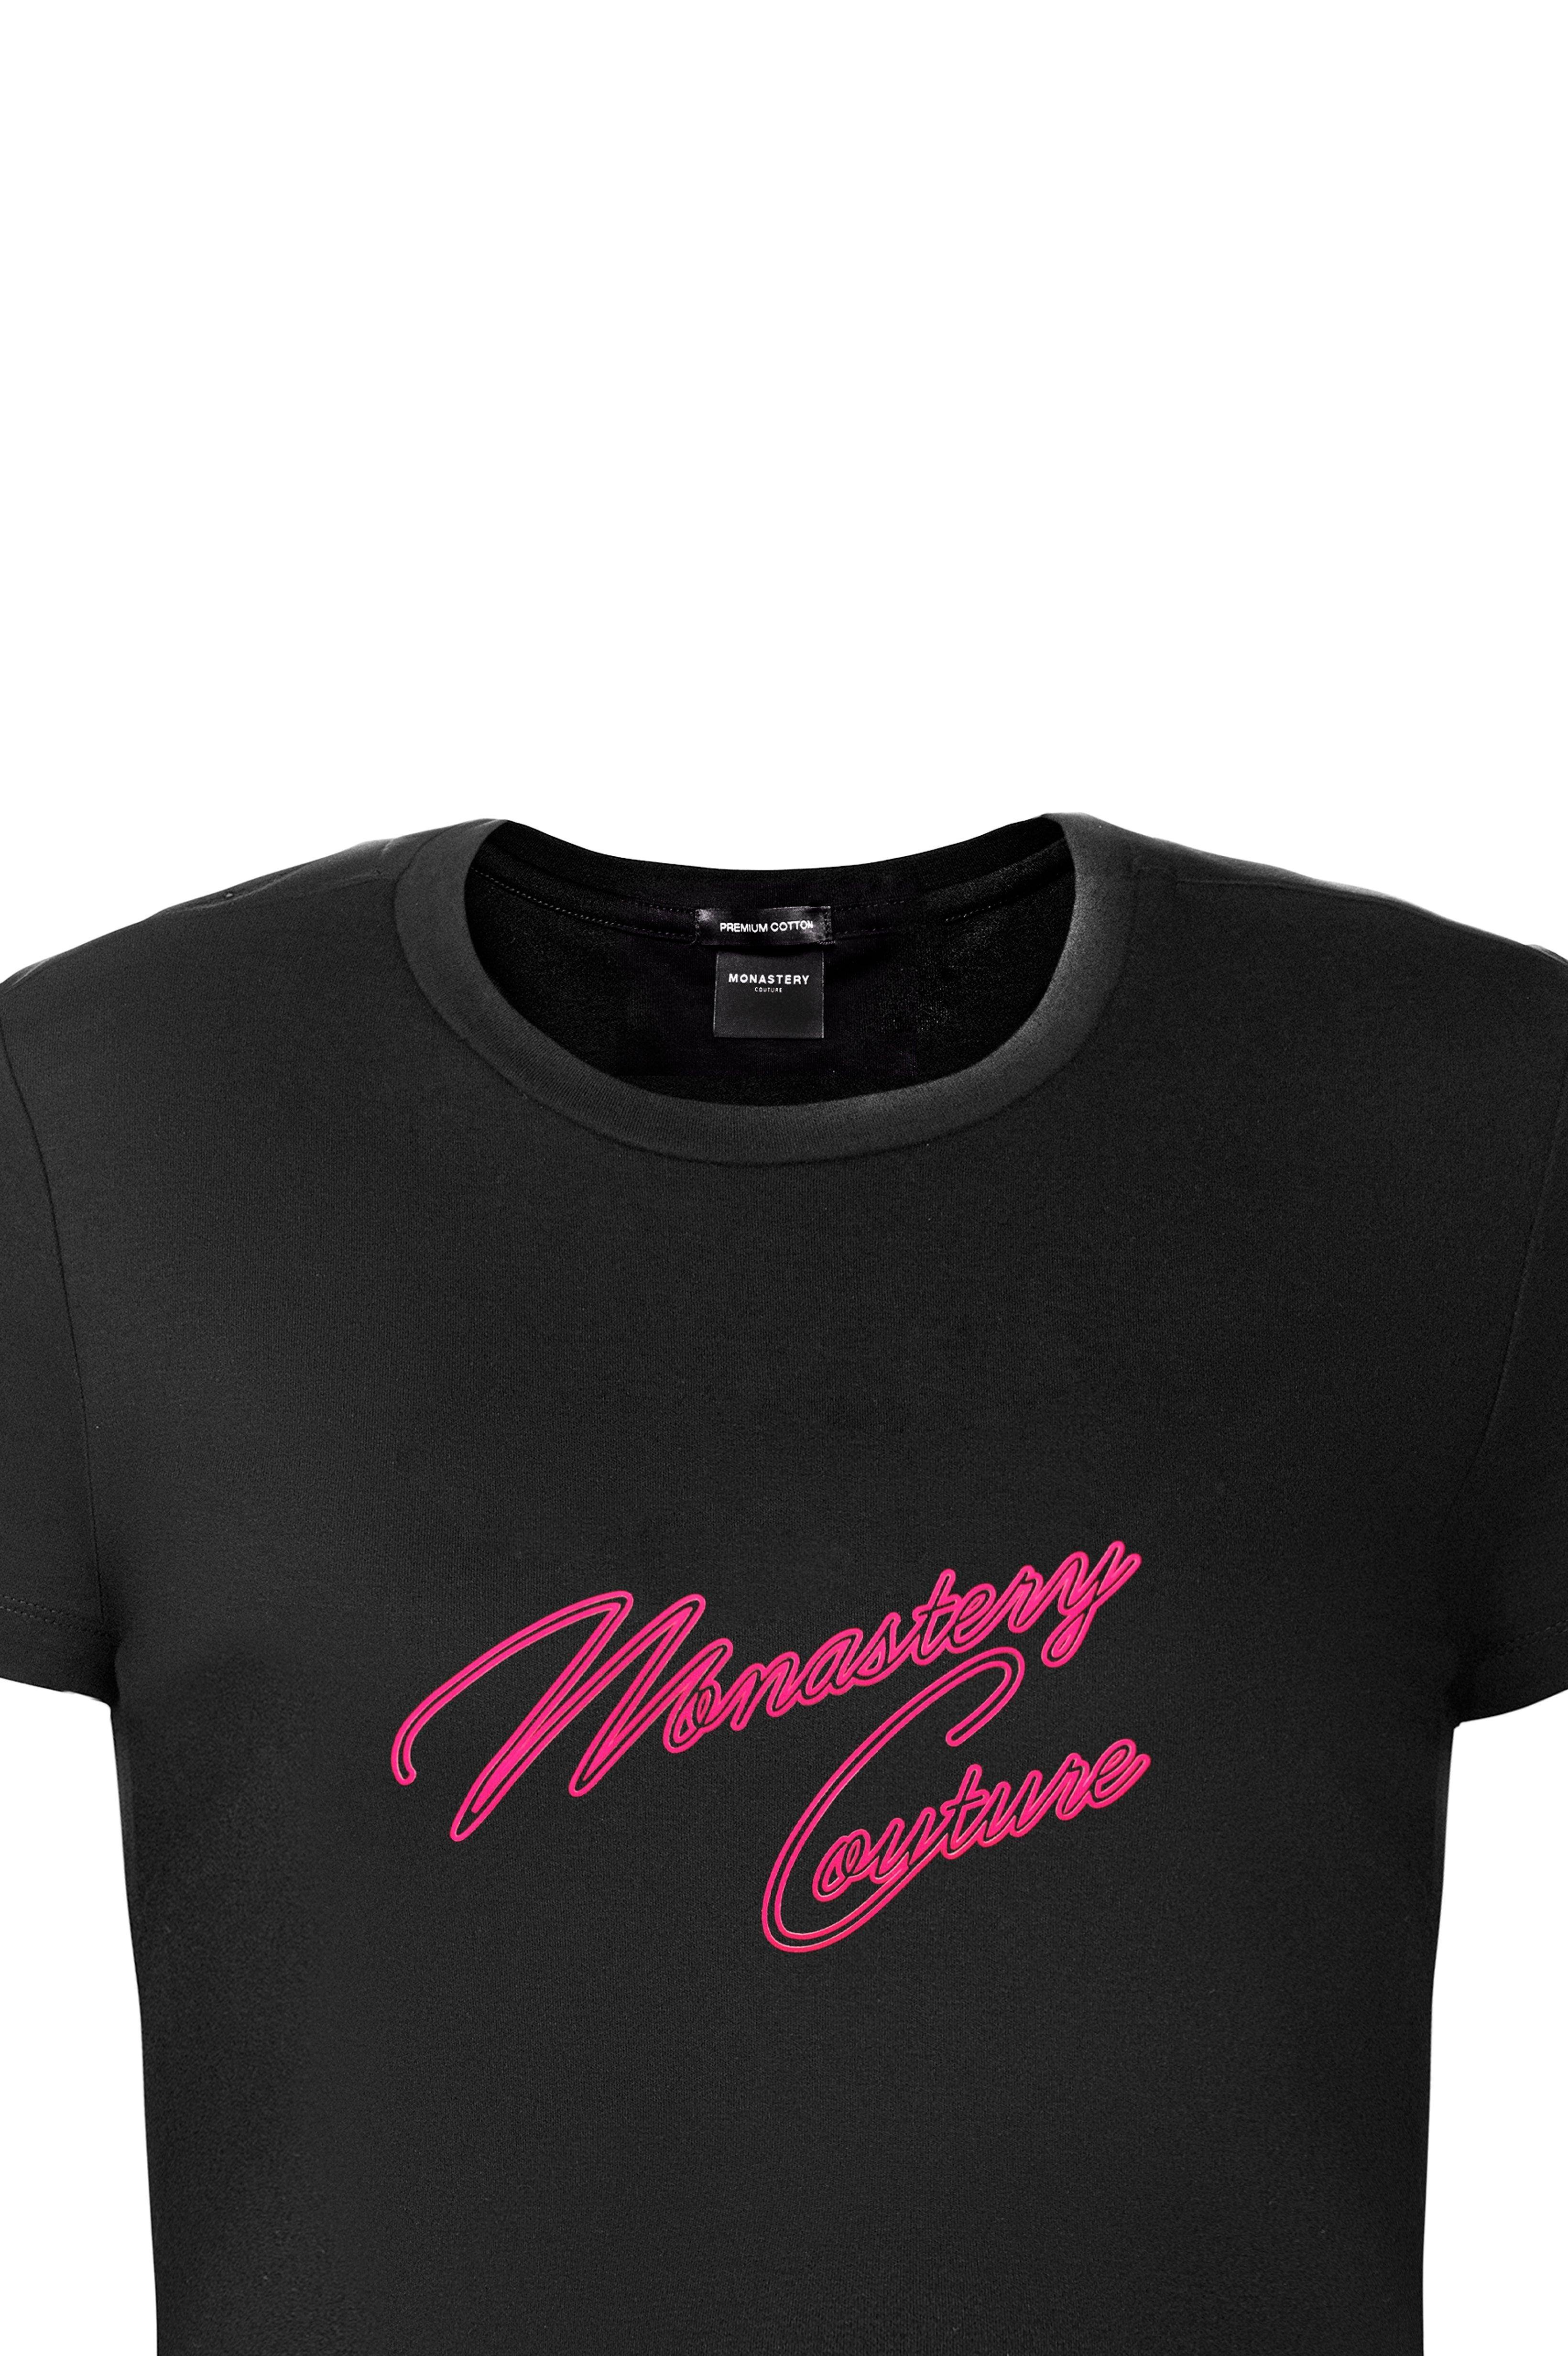 LORD HOWE T-SHIRT BLACK | Monastery Couture